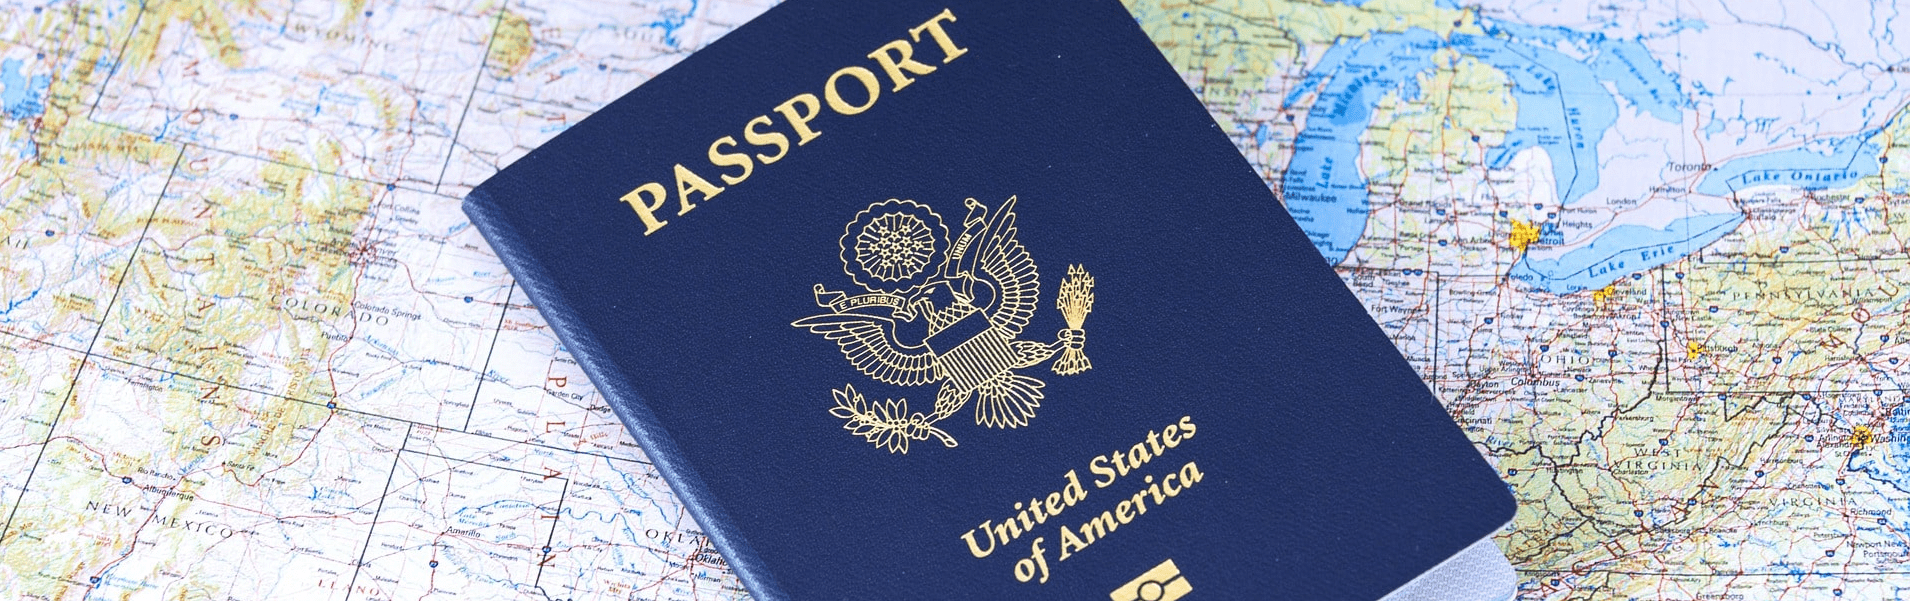 A US passport lies on a map of the United States